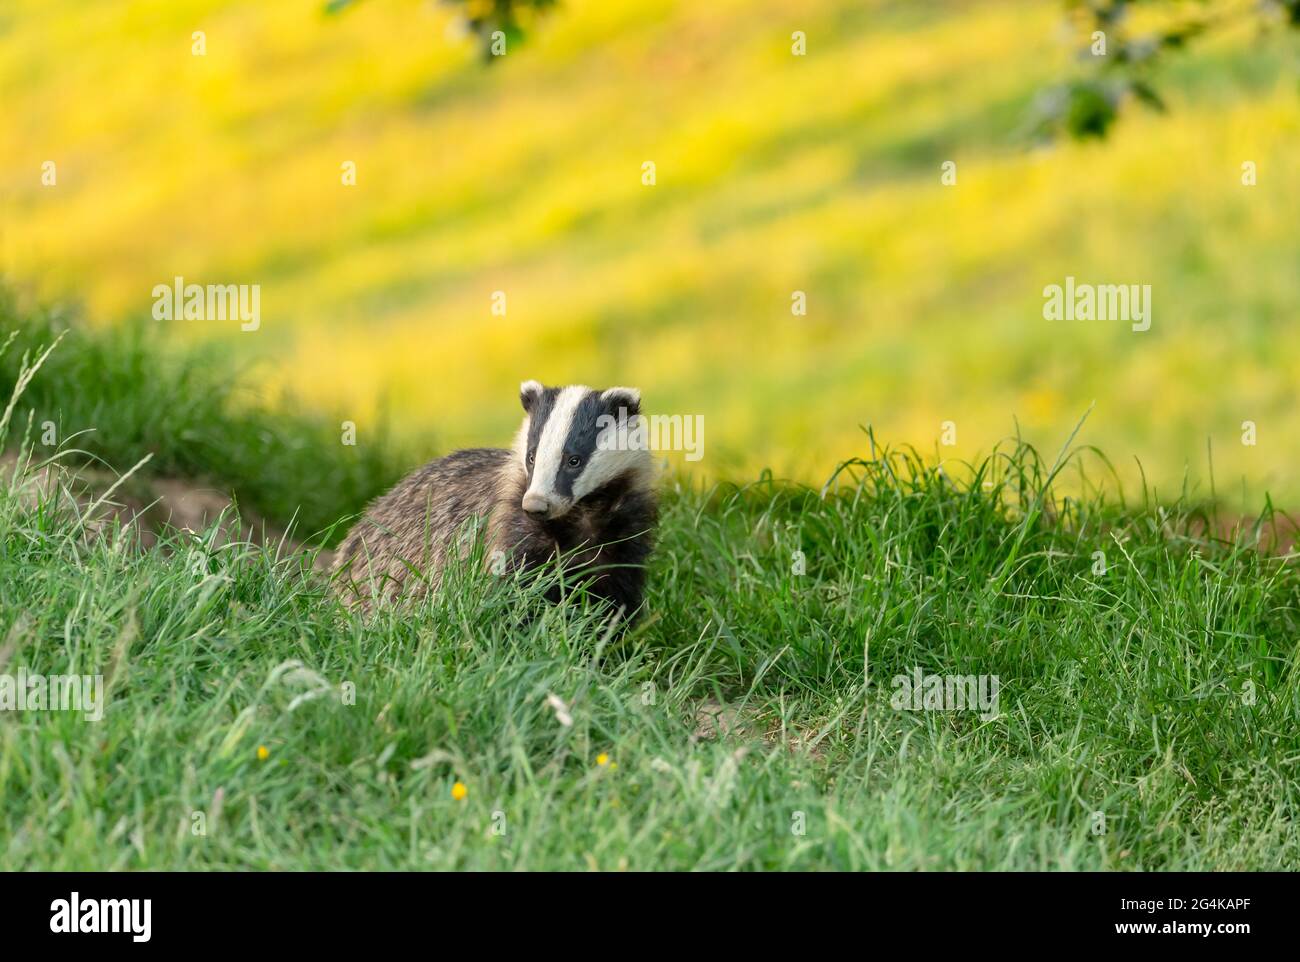 Badger, Scientific name: Meles Meles.  Wild, native badger stood at the badger sett on Midsummer's night with a field of yellow buttercups in the back Stock Photo